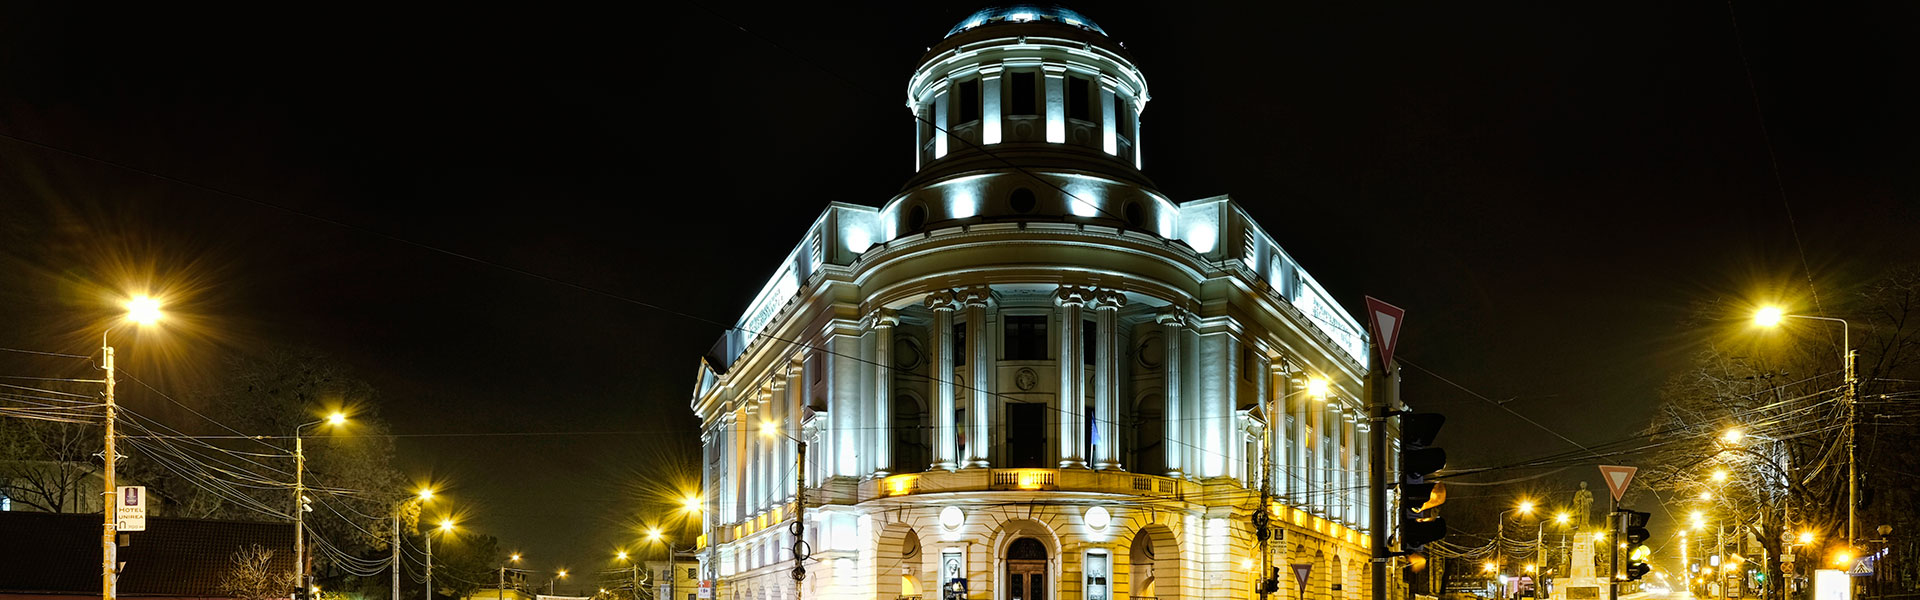 'M.Eminescu' Central University Library Iasi